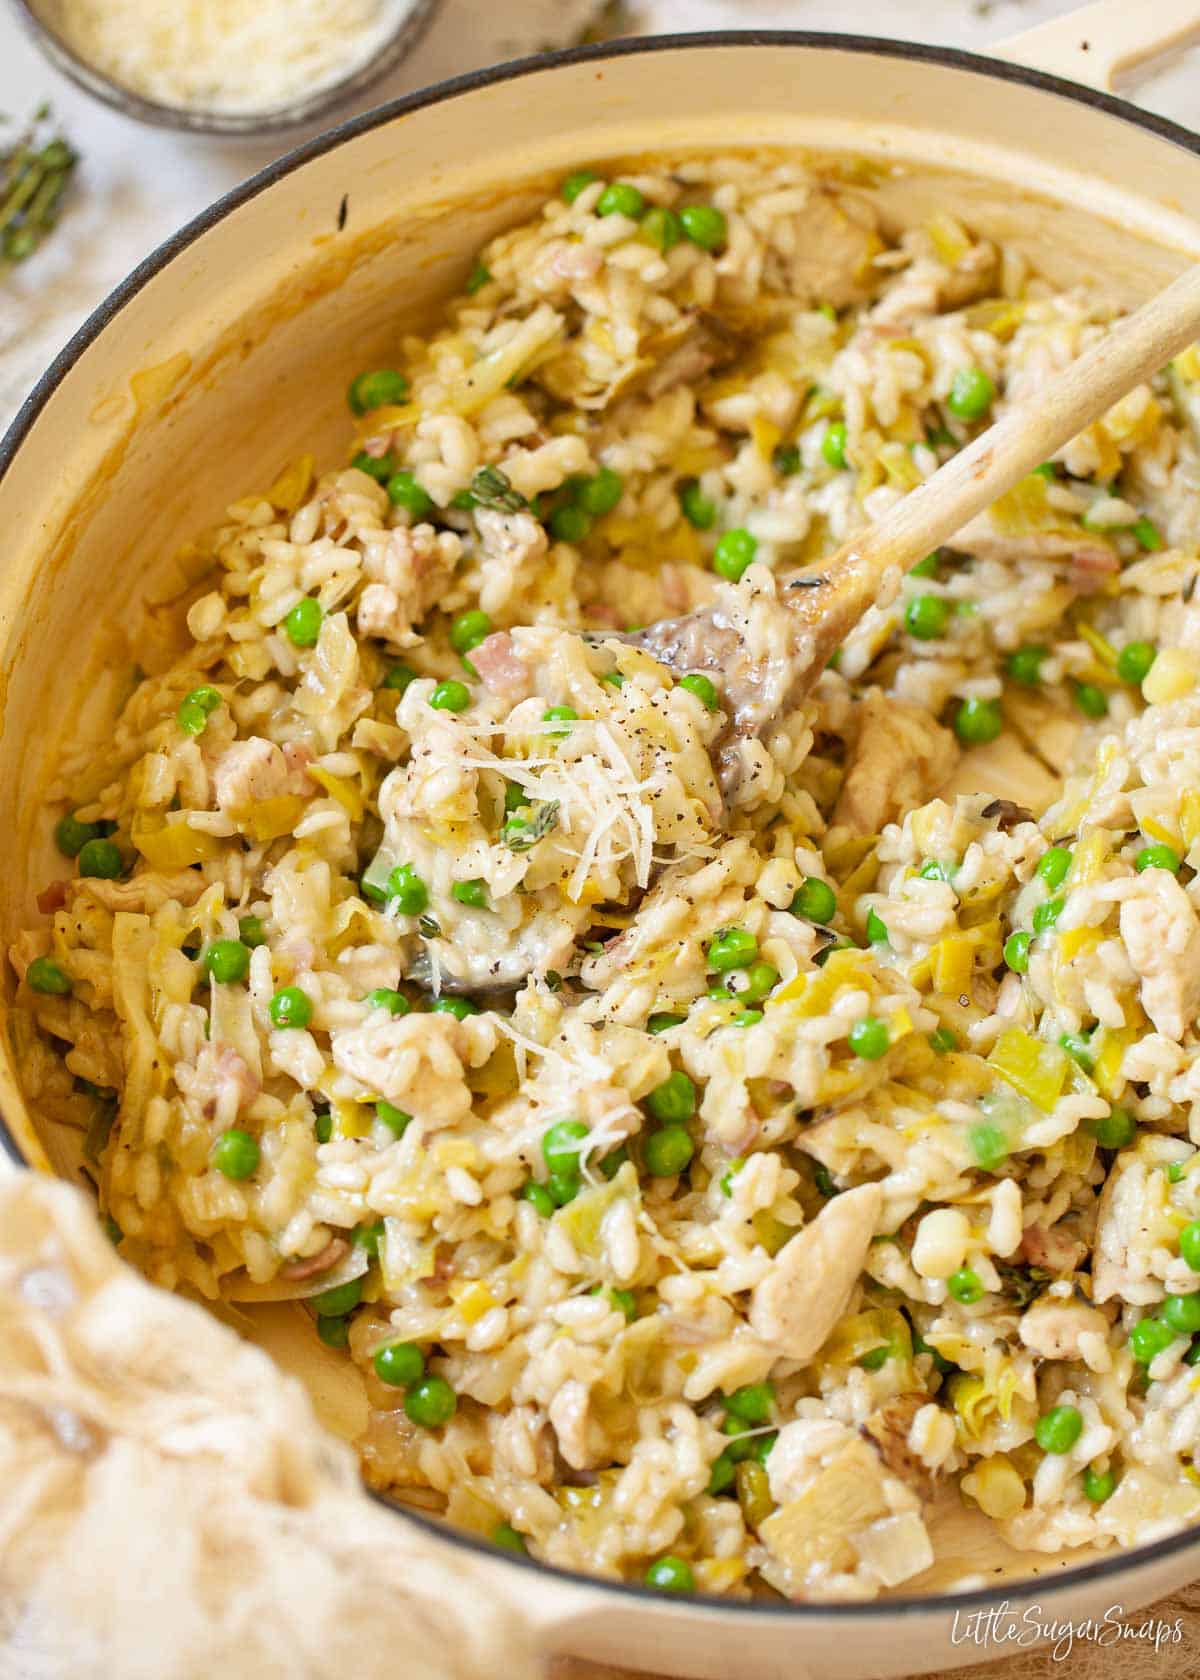 A large cast iron cooking pot holding risotto with leeks, chicken, peas, bacon, chicken and thyme.